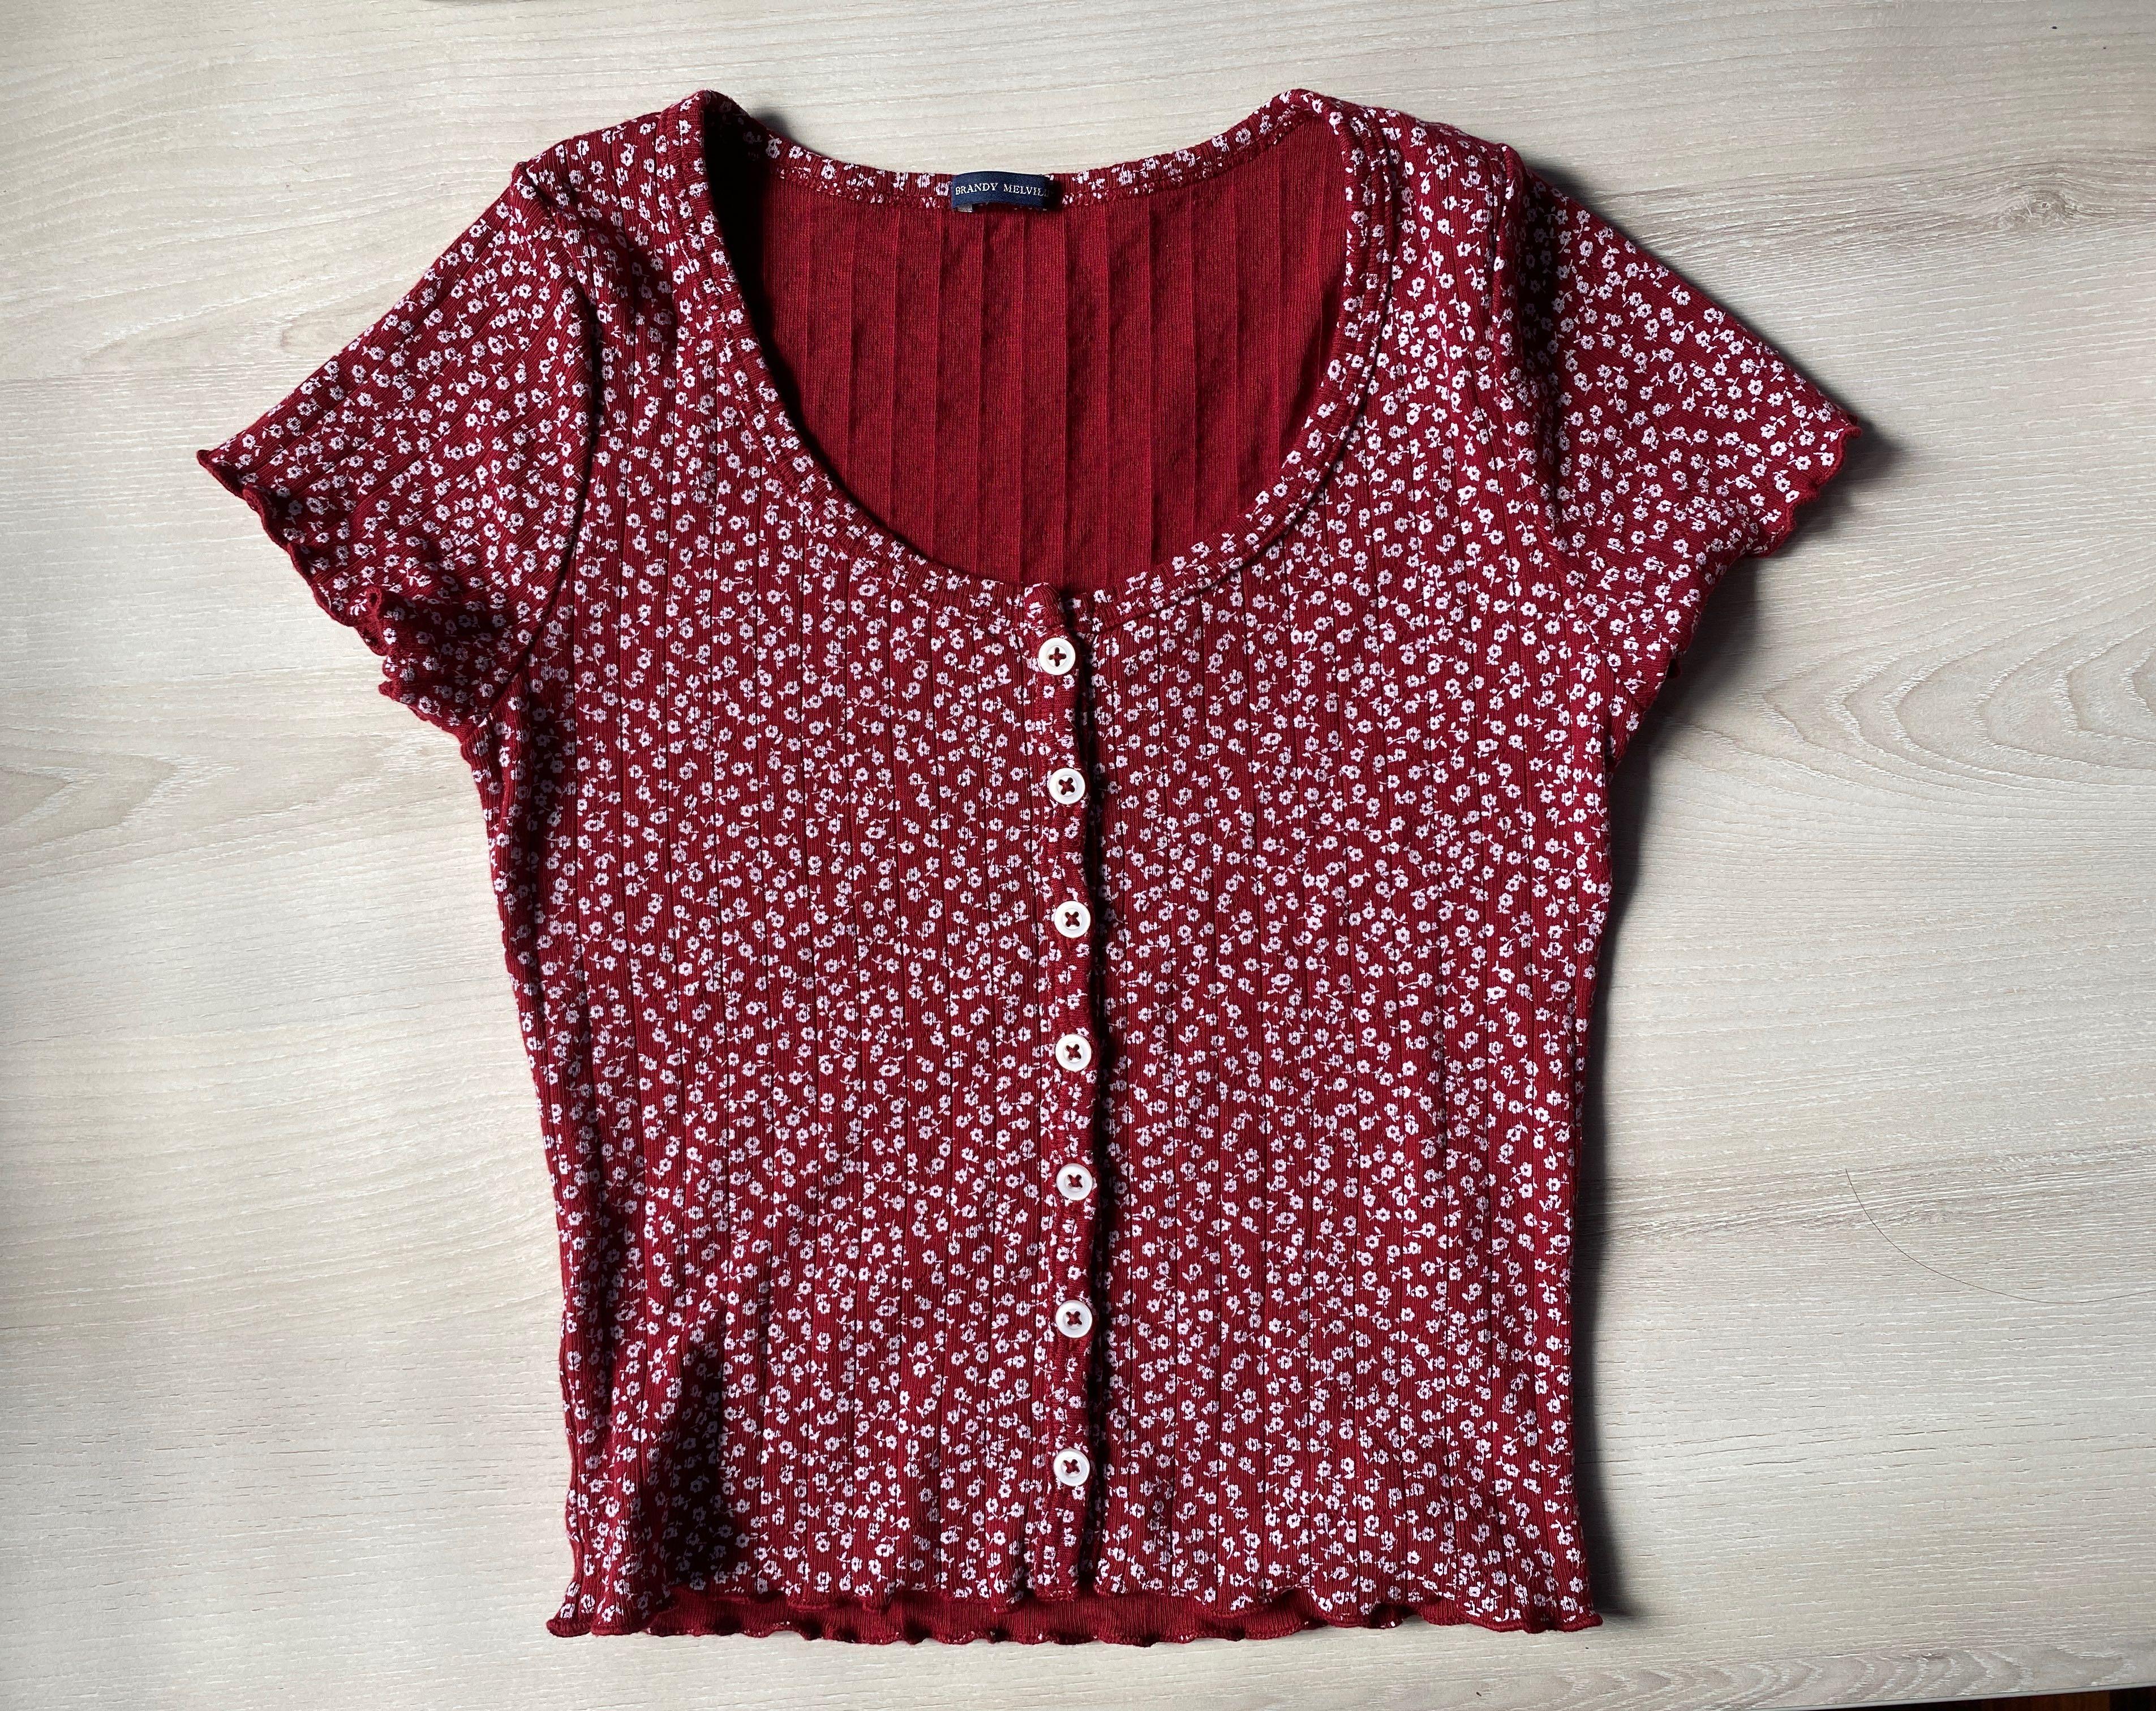 Bnwot Brandy Melville Red Floral Ruffle Zelly Top Women S Fashion Tops Sleeveless On Carousell